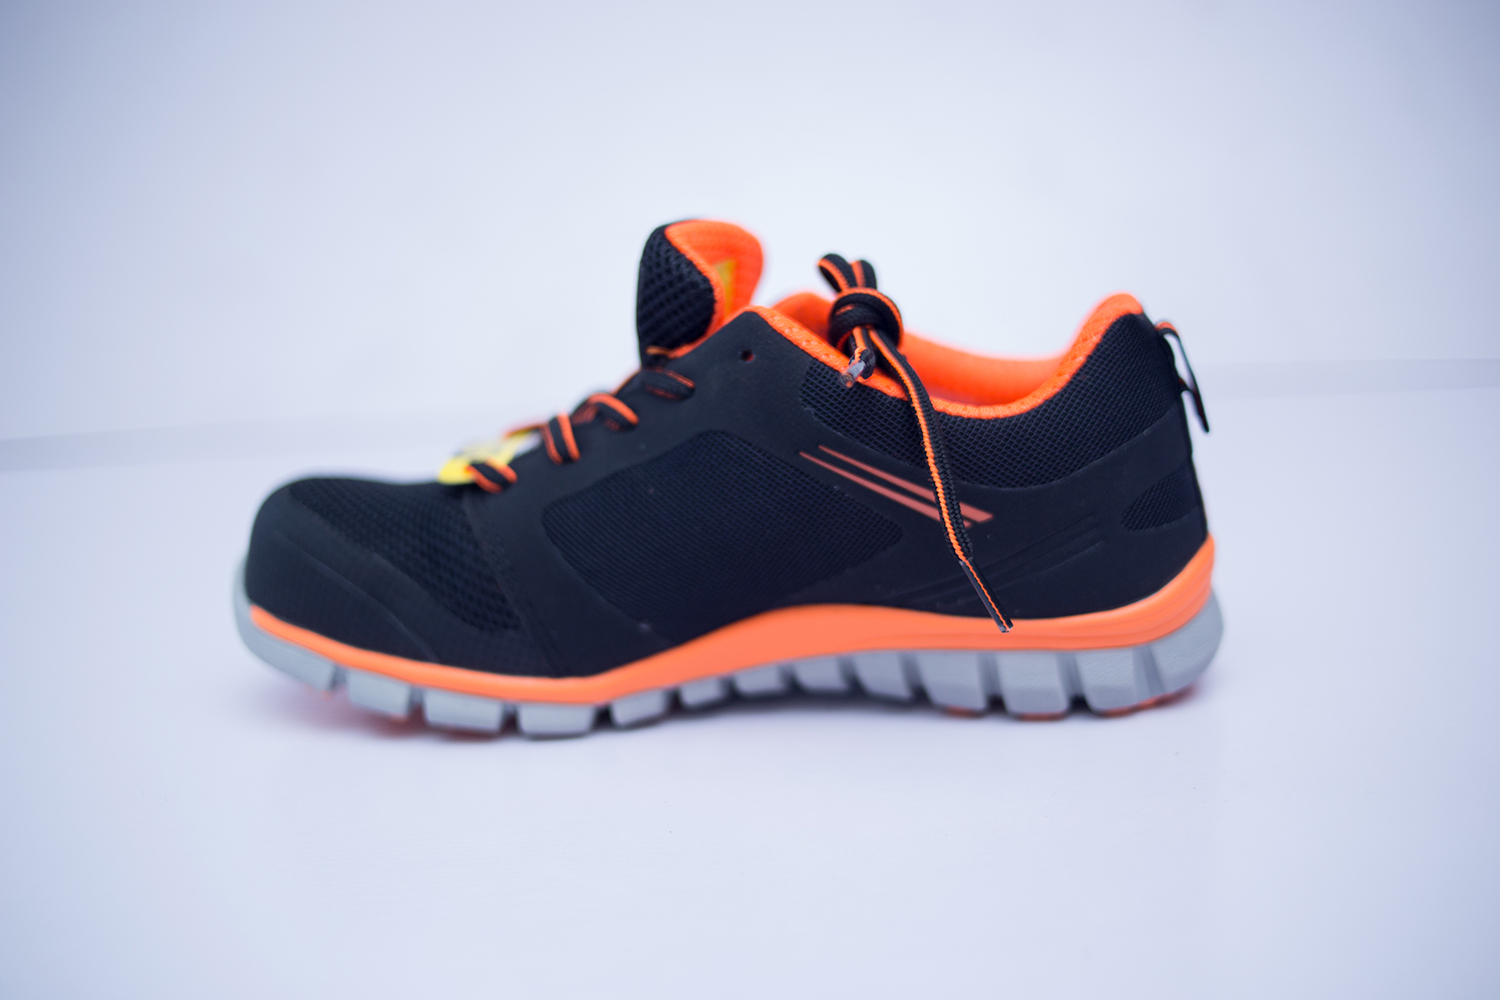 Anaps Hybrid Insole Safety Jogger Ligero - Anaps Safety | Best PPE Supplier